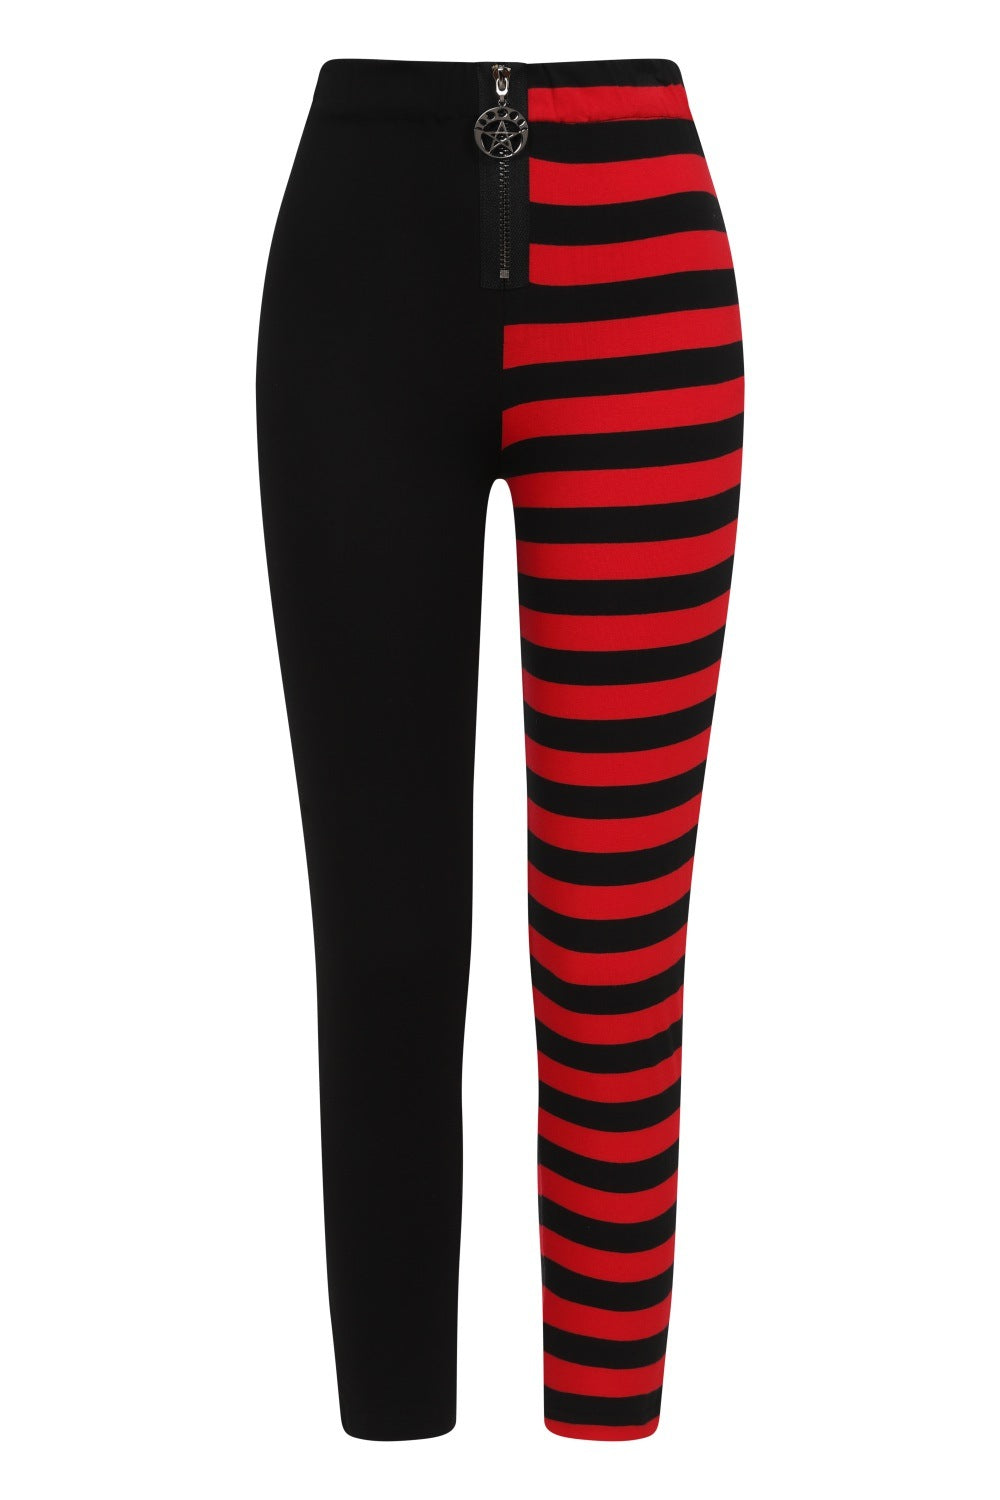 High waisted leggings with one striped red leg and zip waist 